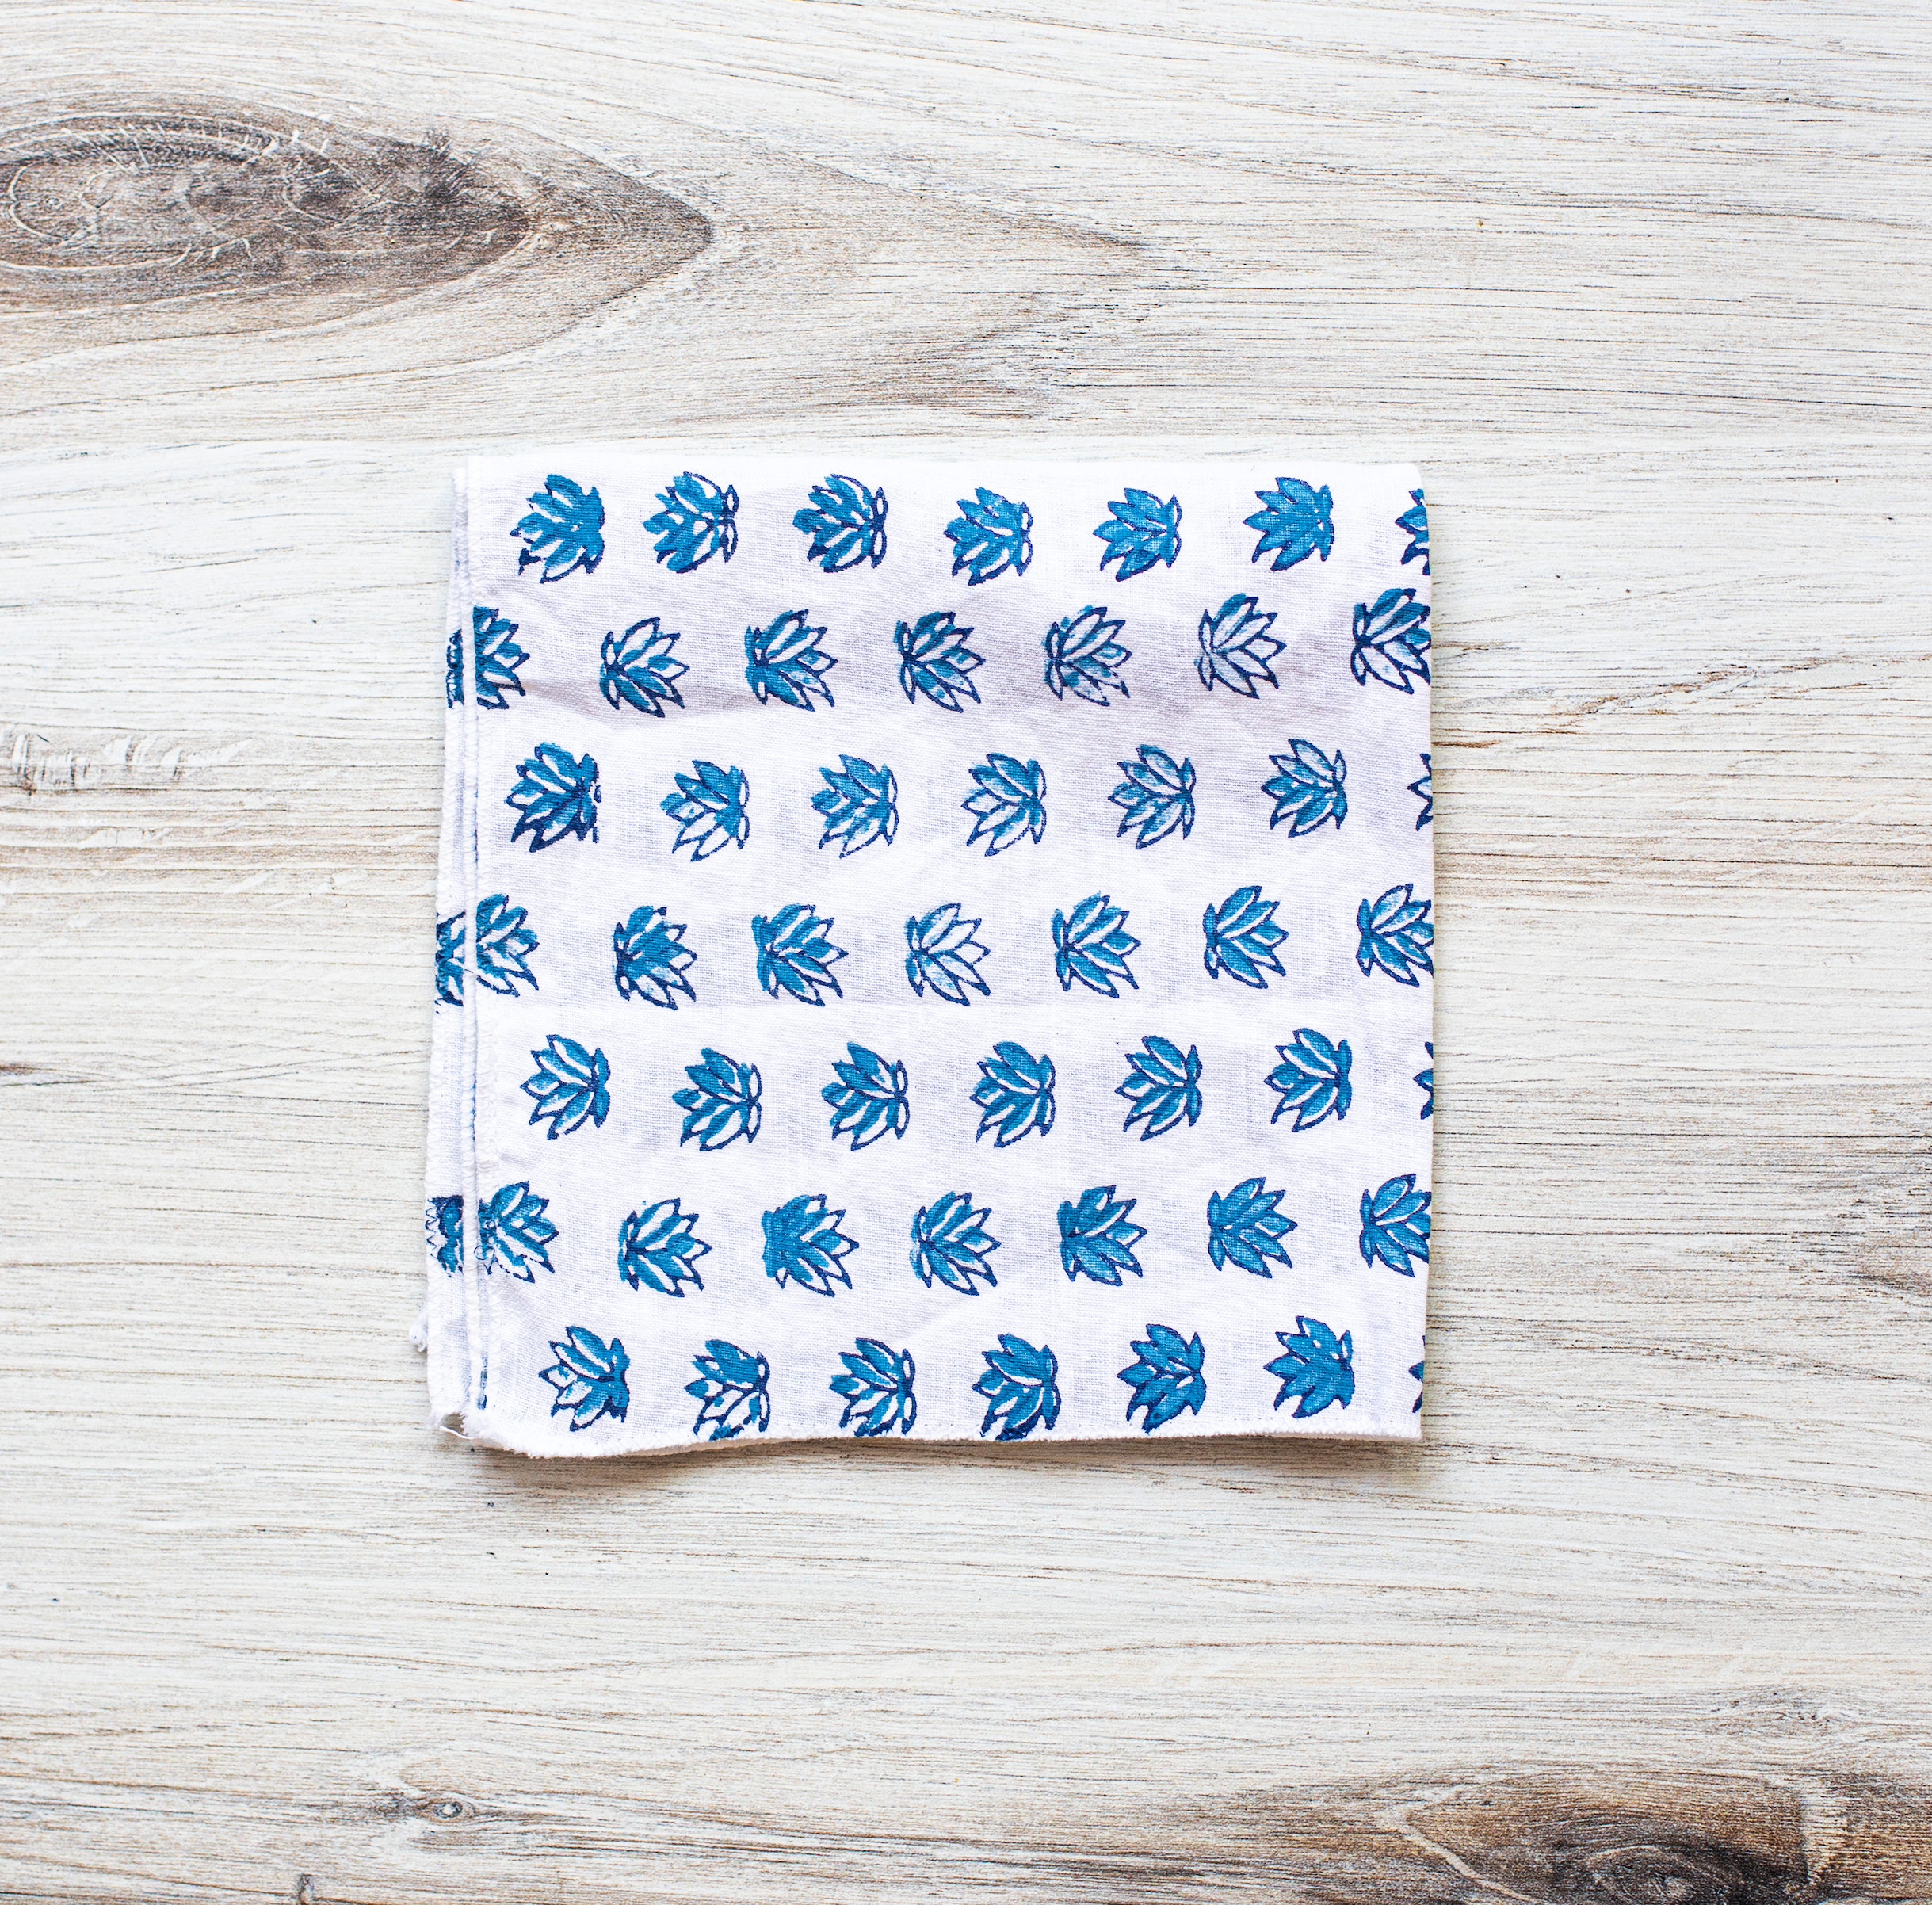 Pocket Square - White Linen with Uniform Blue & Navy by Mended